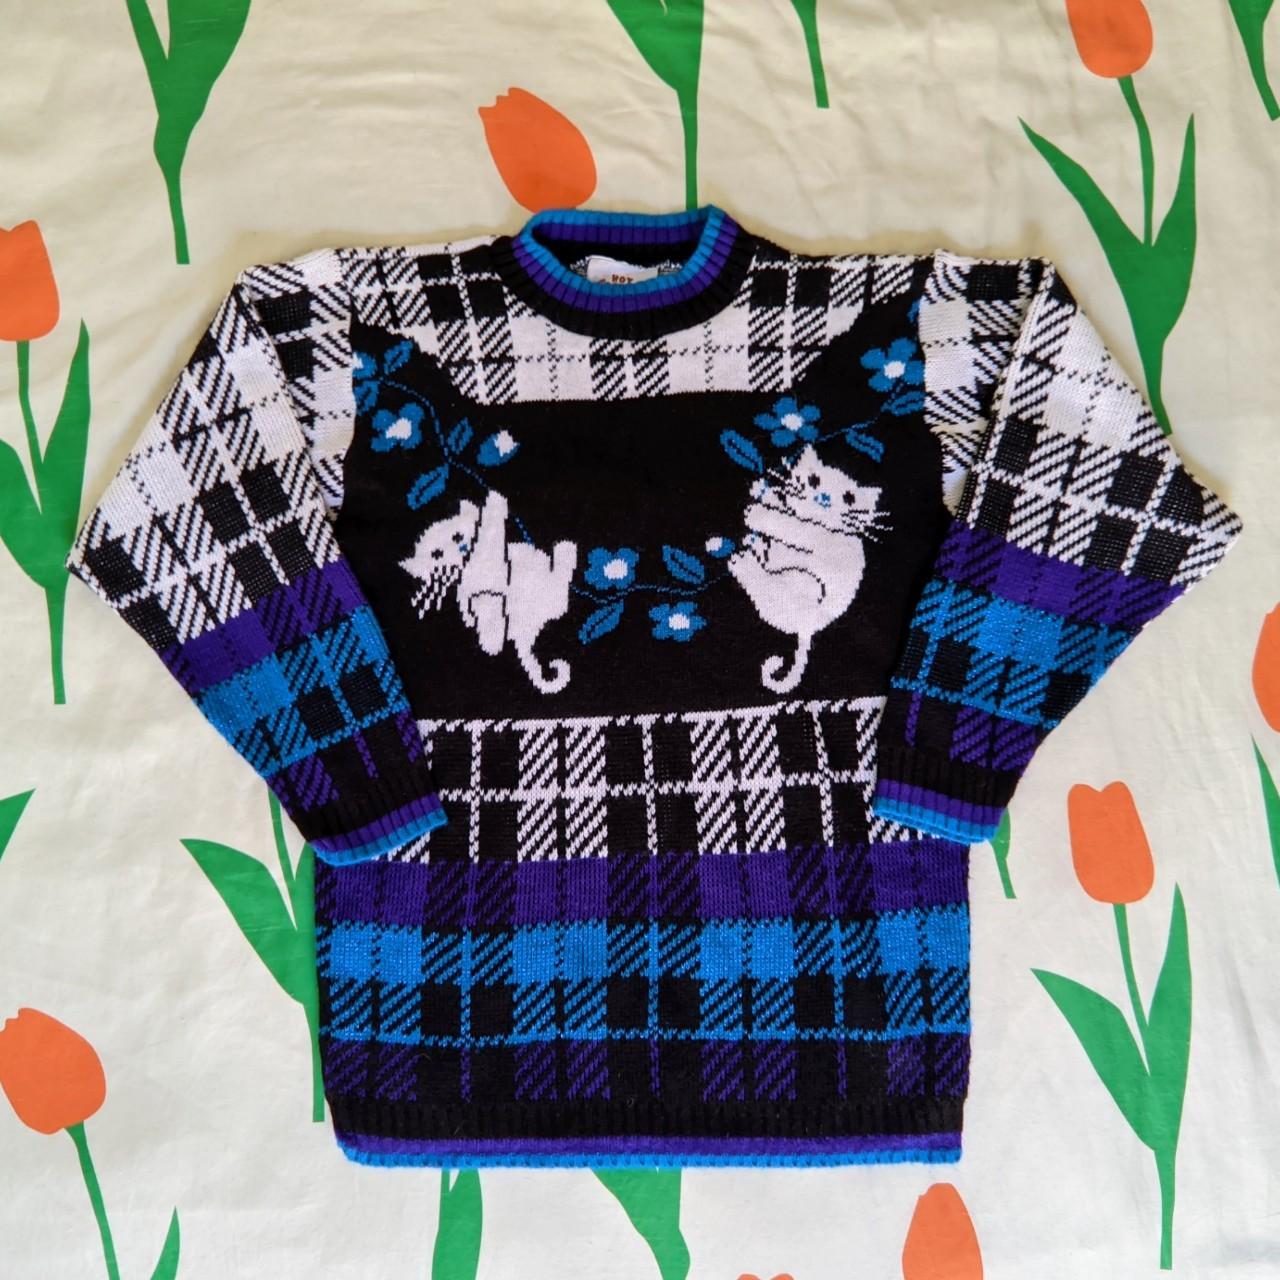 🐱💙🐱 80s kidcore cat sweater with black & white plaid... - Depop